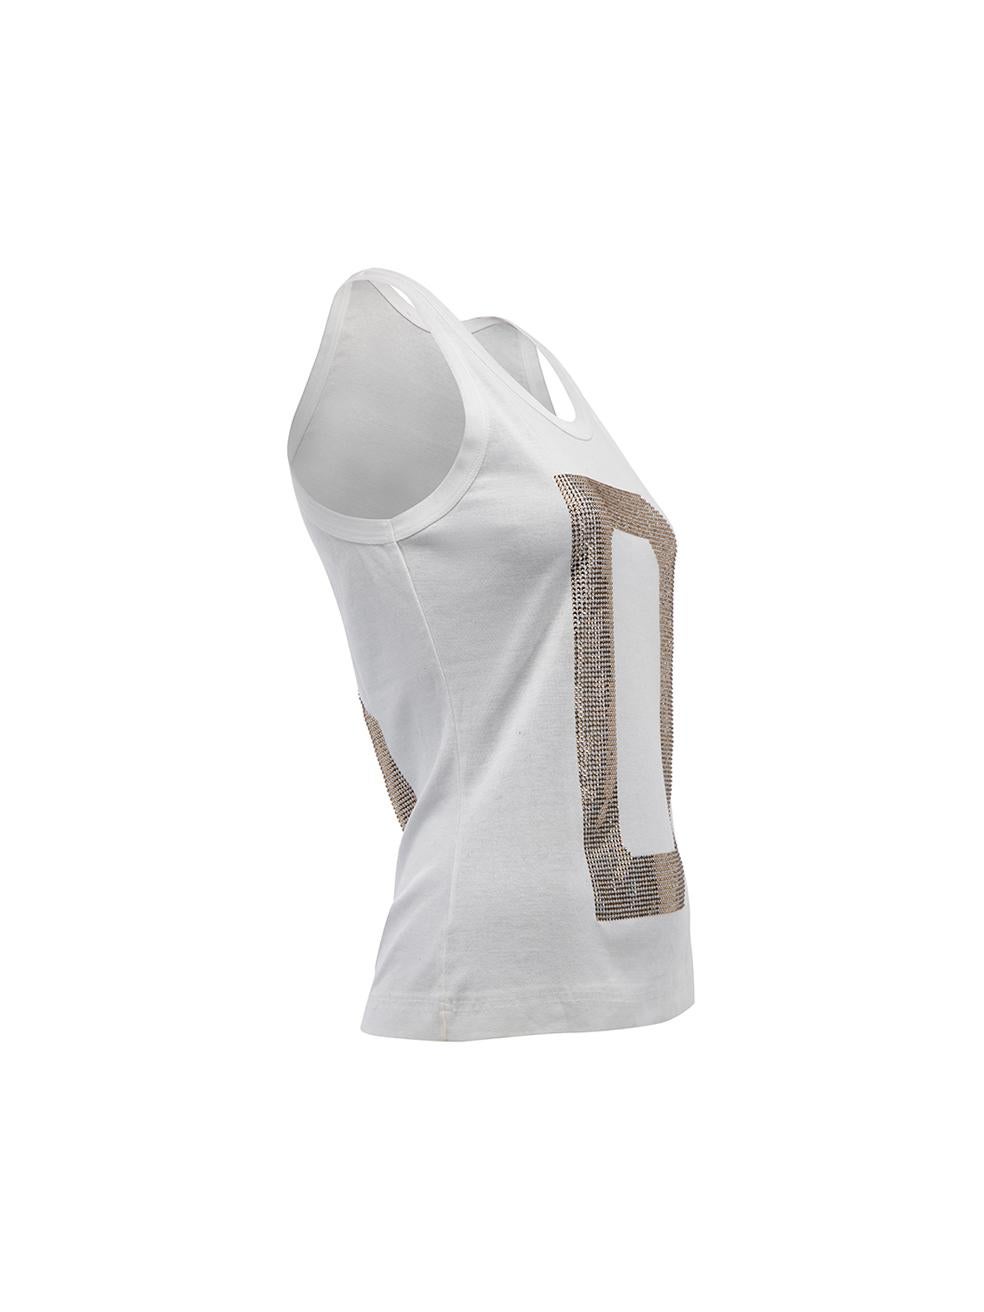 CONDITION is Very good. Hardly any visible wear to top is evident on this used Dolce & Gabbana designer resale item. Details White Cotton Tank top Round neckline Crystal embellished initial design D lettering on front G lettering on back Made in